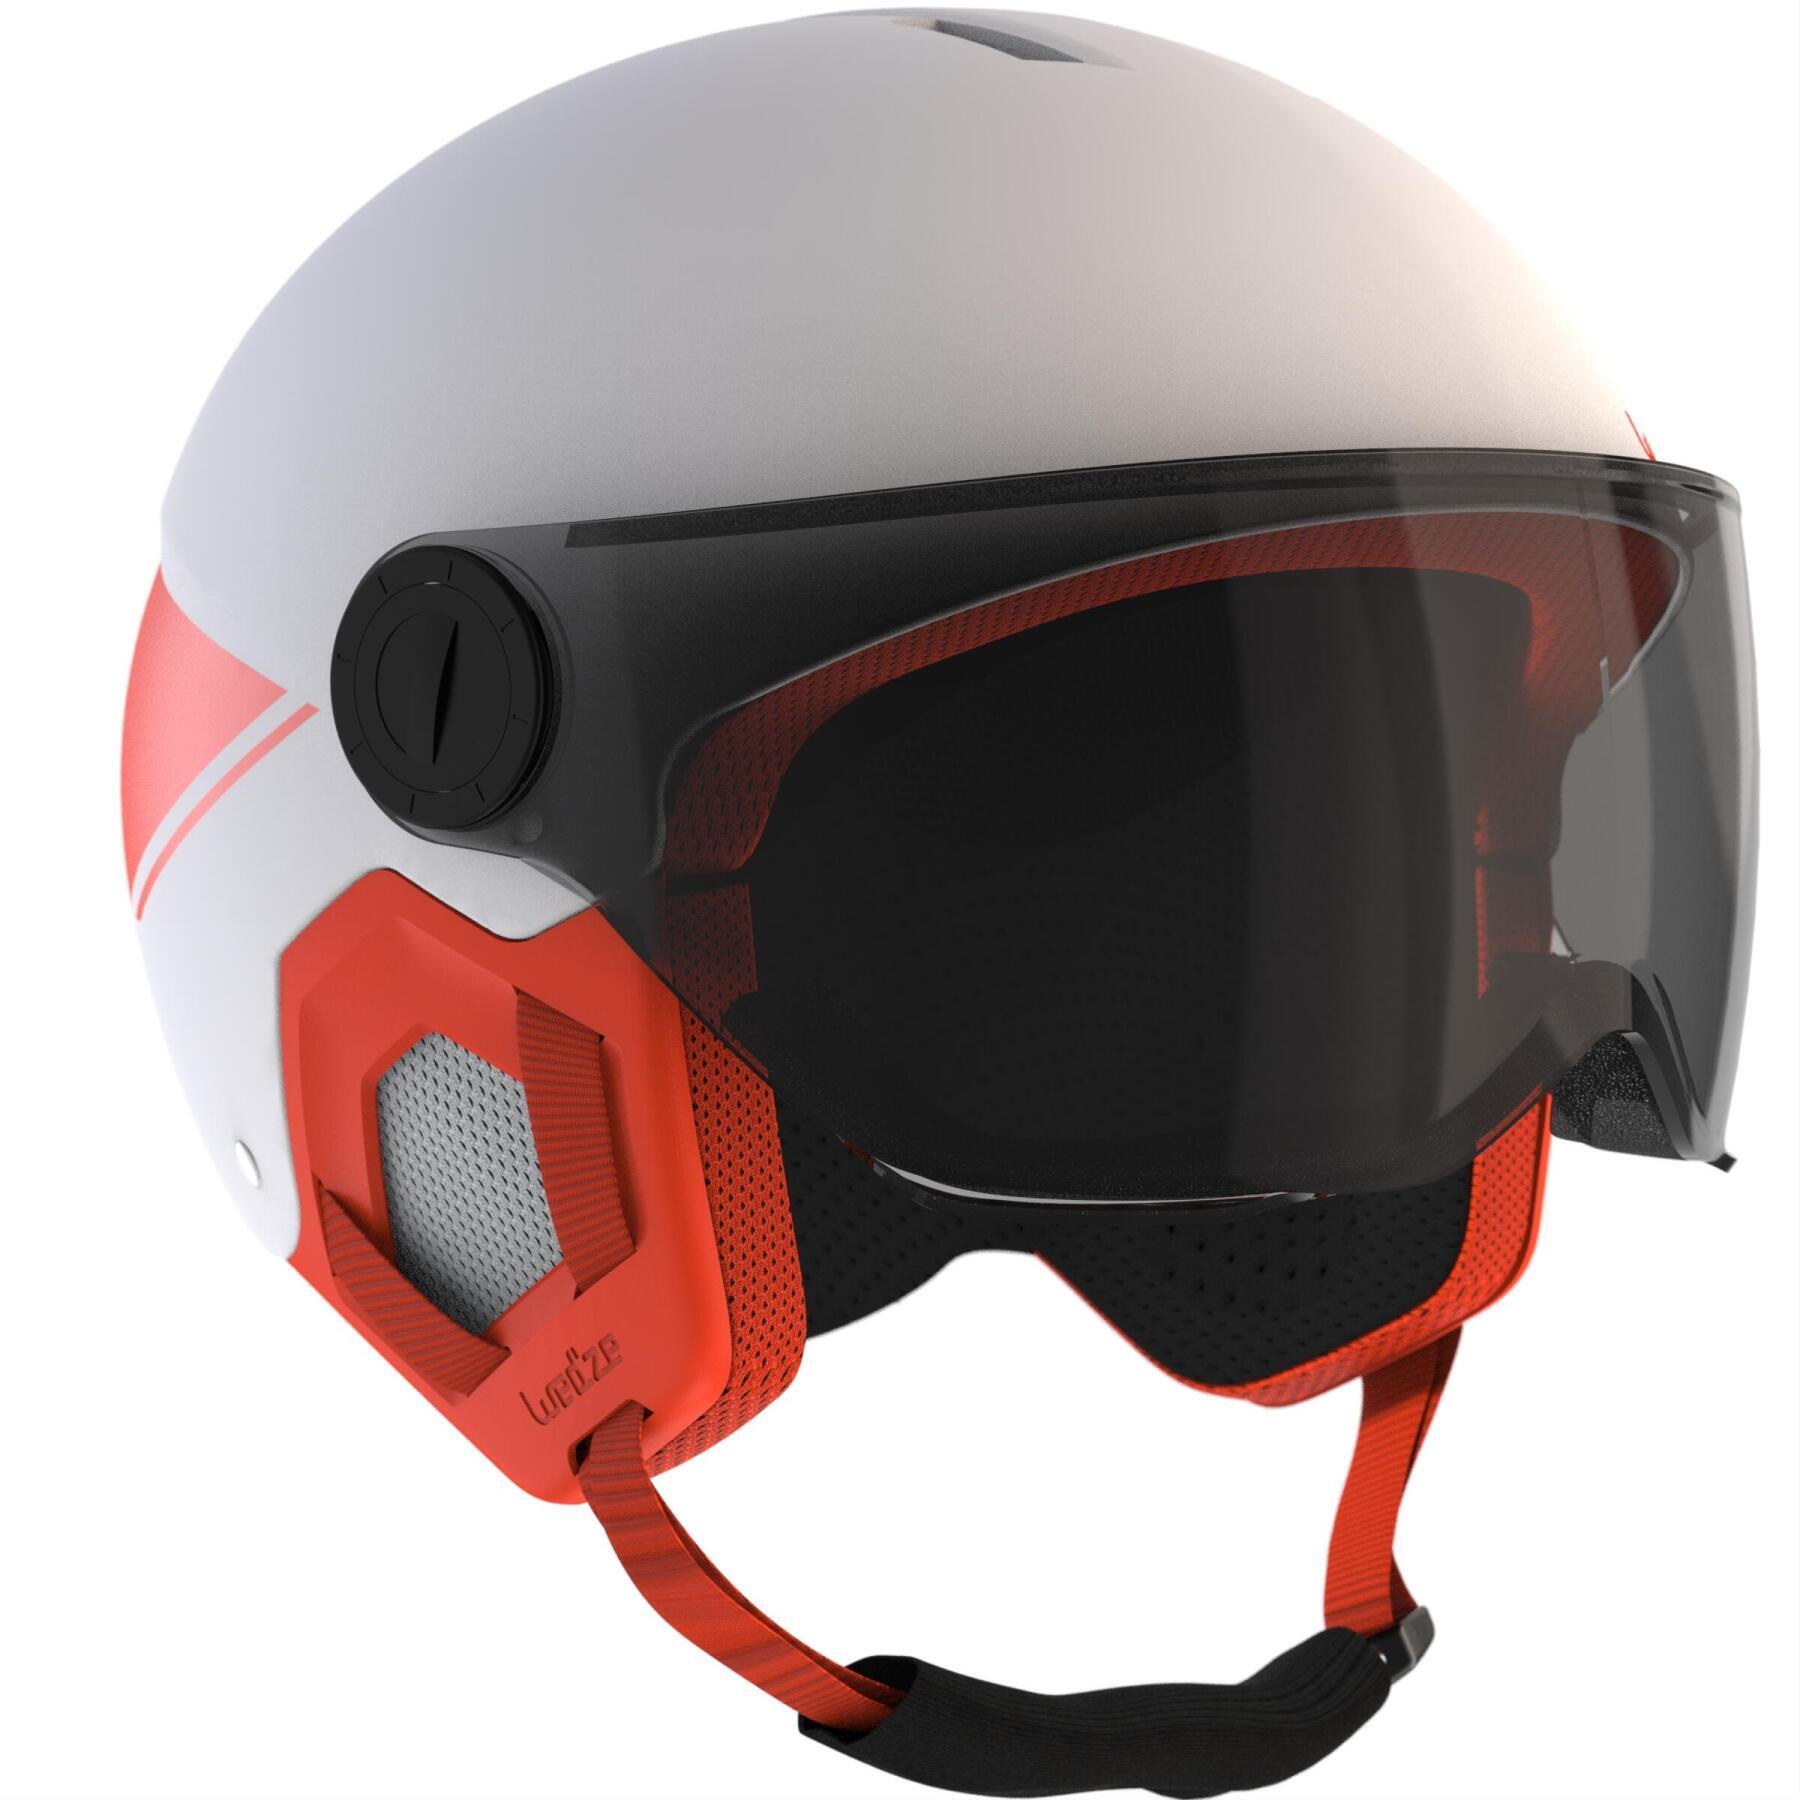 piste skiing goggles and helmet